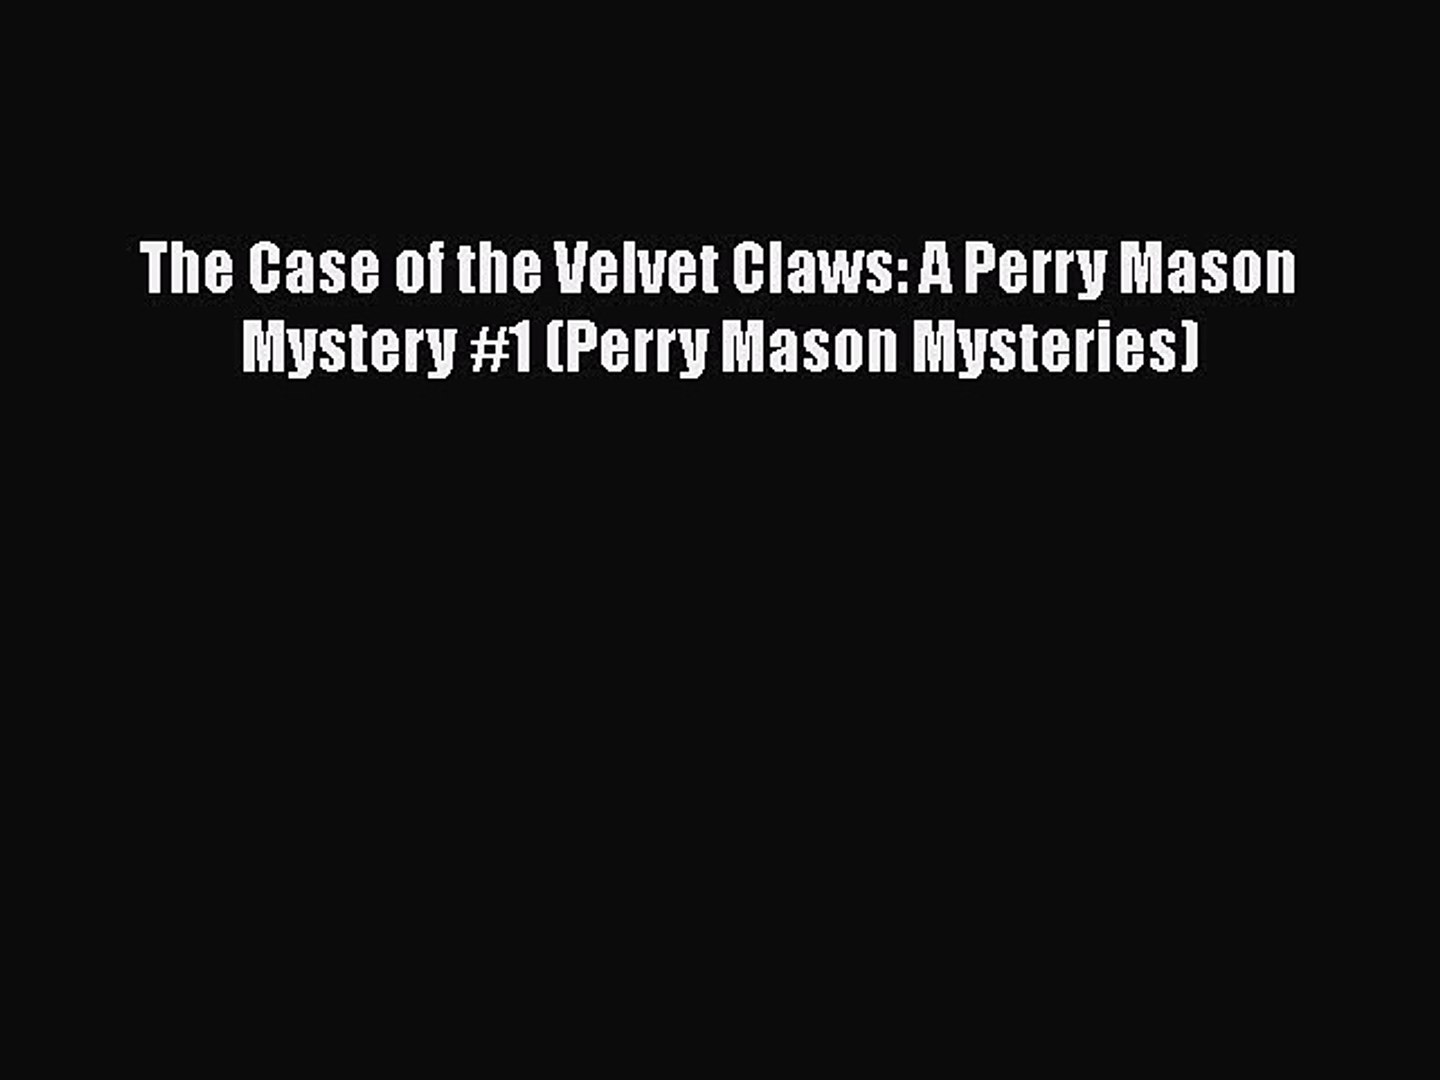 [PDF] The Case of the Velvet Claws: A Perry Mason Mystery #1 (Perry Mason Mysteries) [Download]